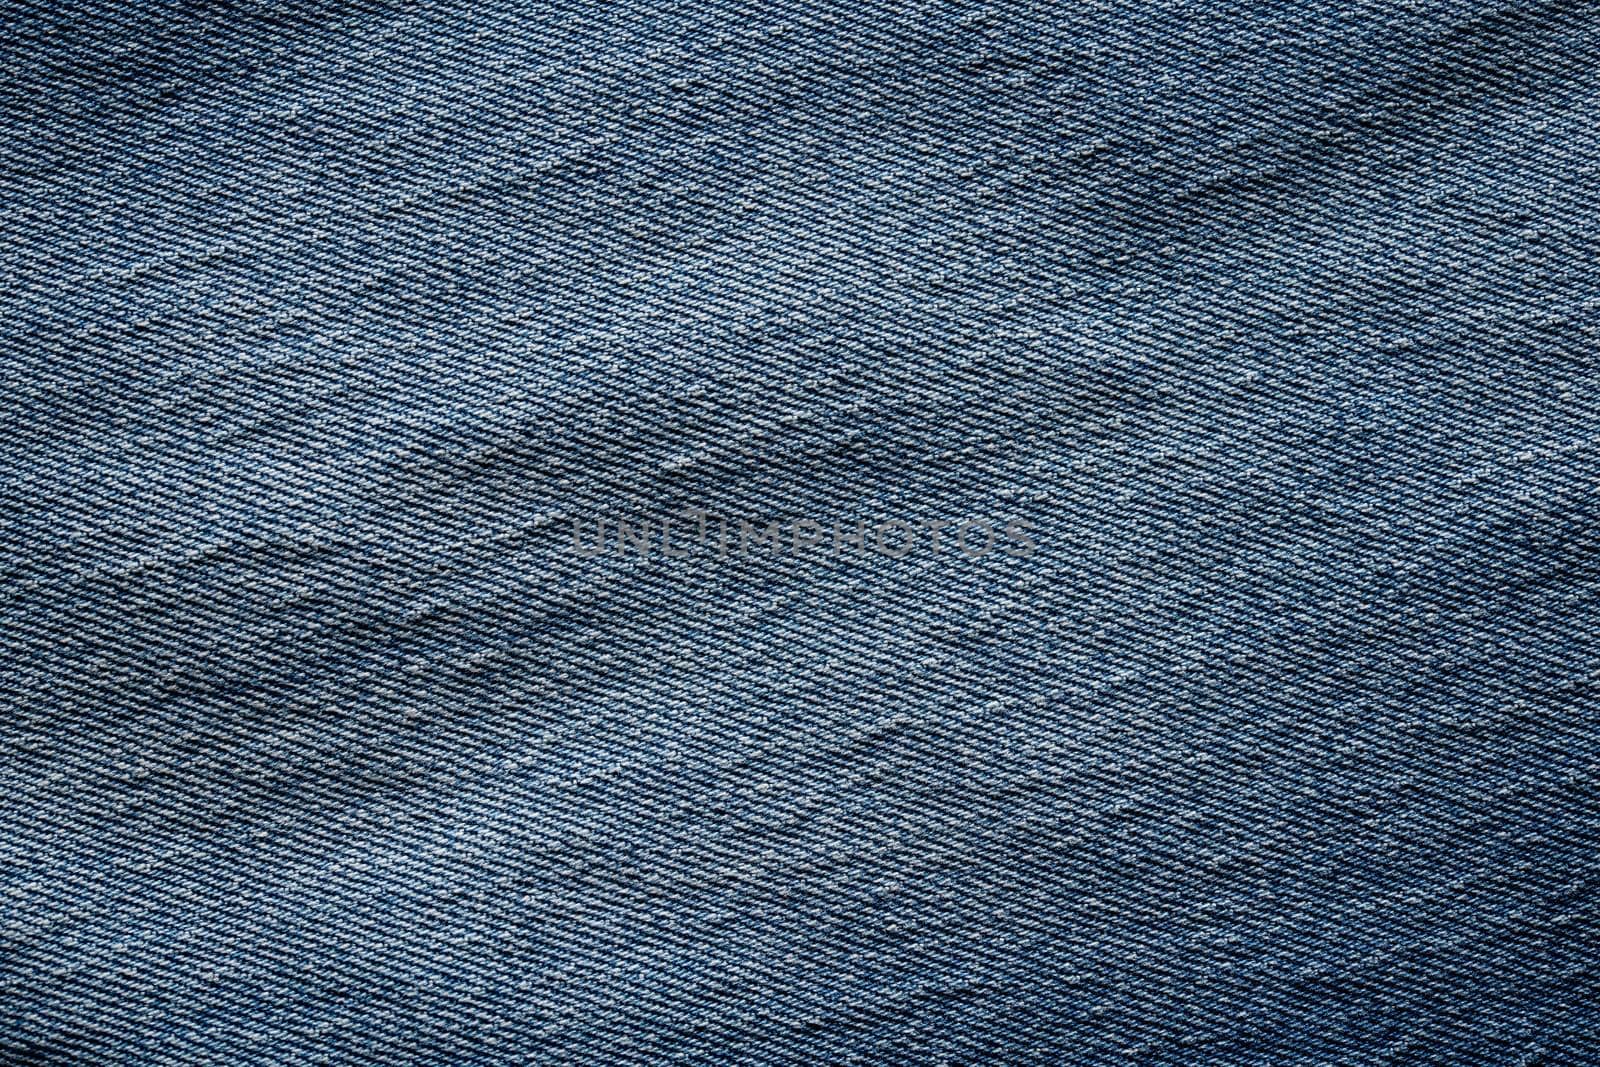 Ecological blue jeans that can be used as a background that completely covers the screen by Sonat